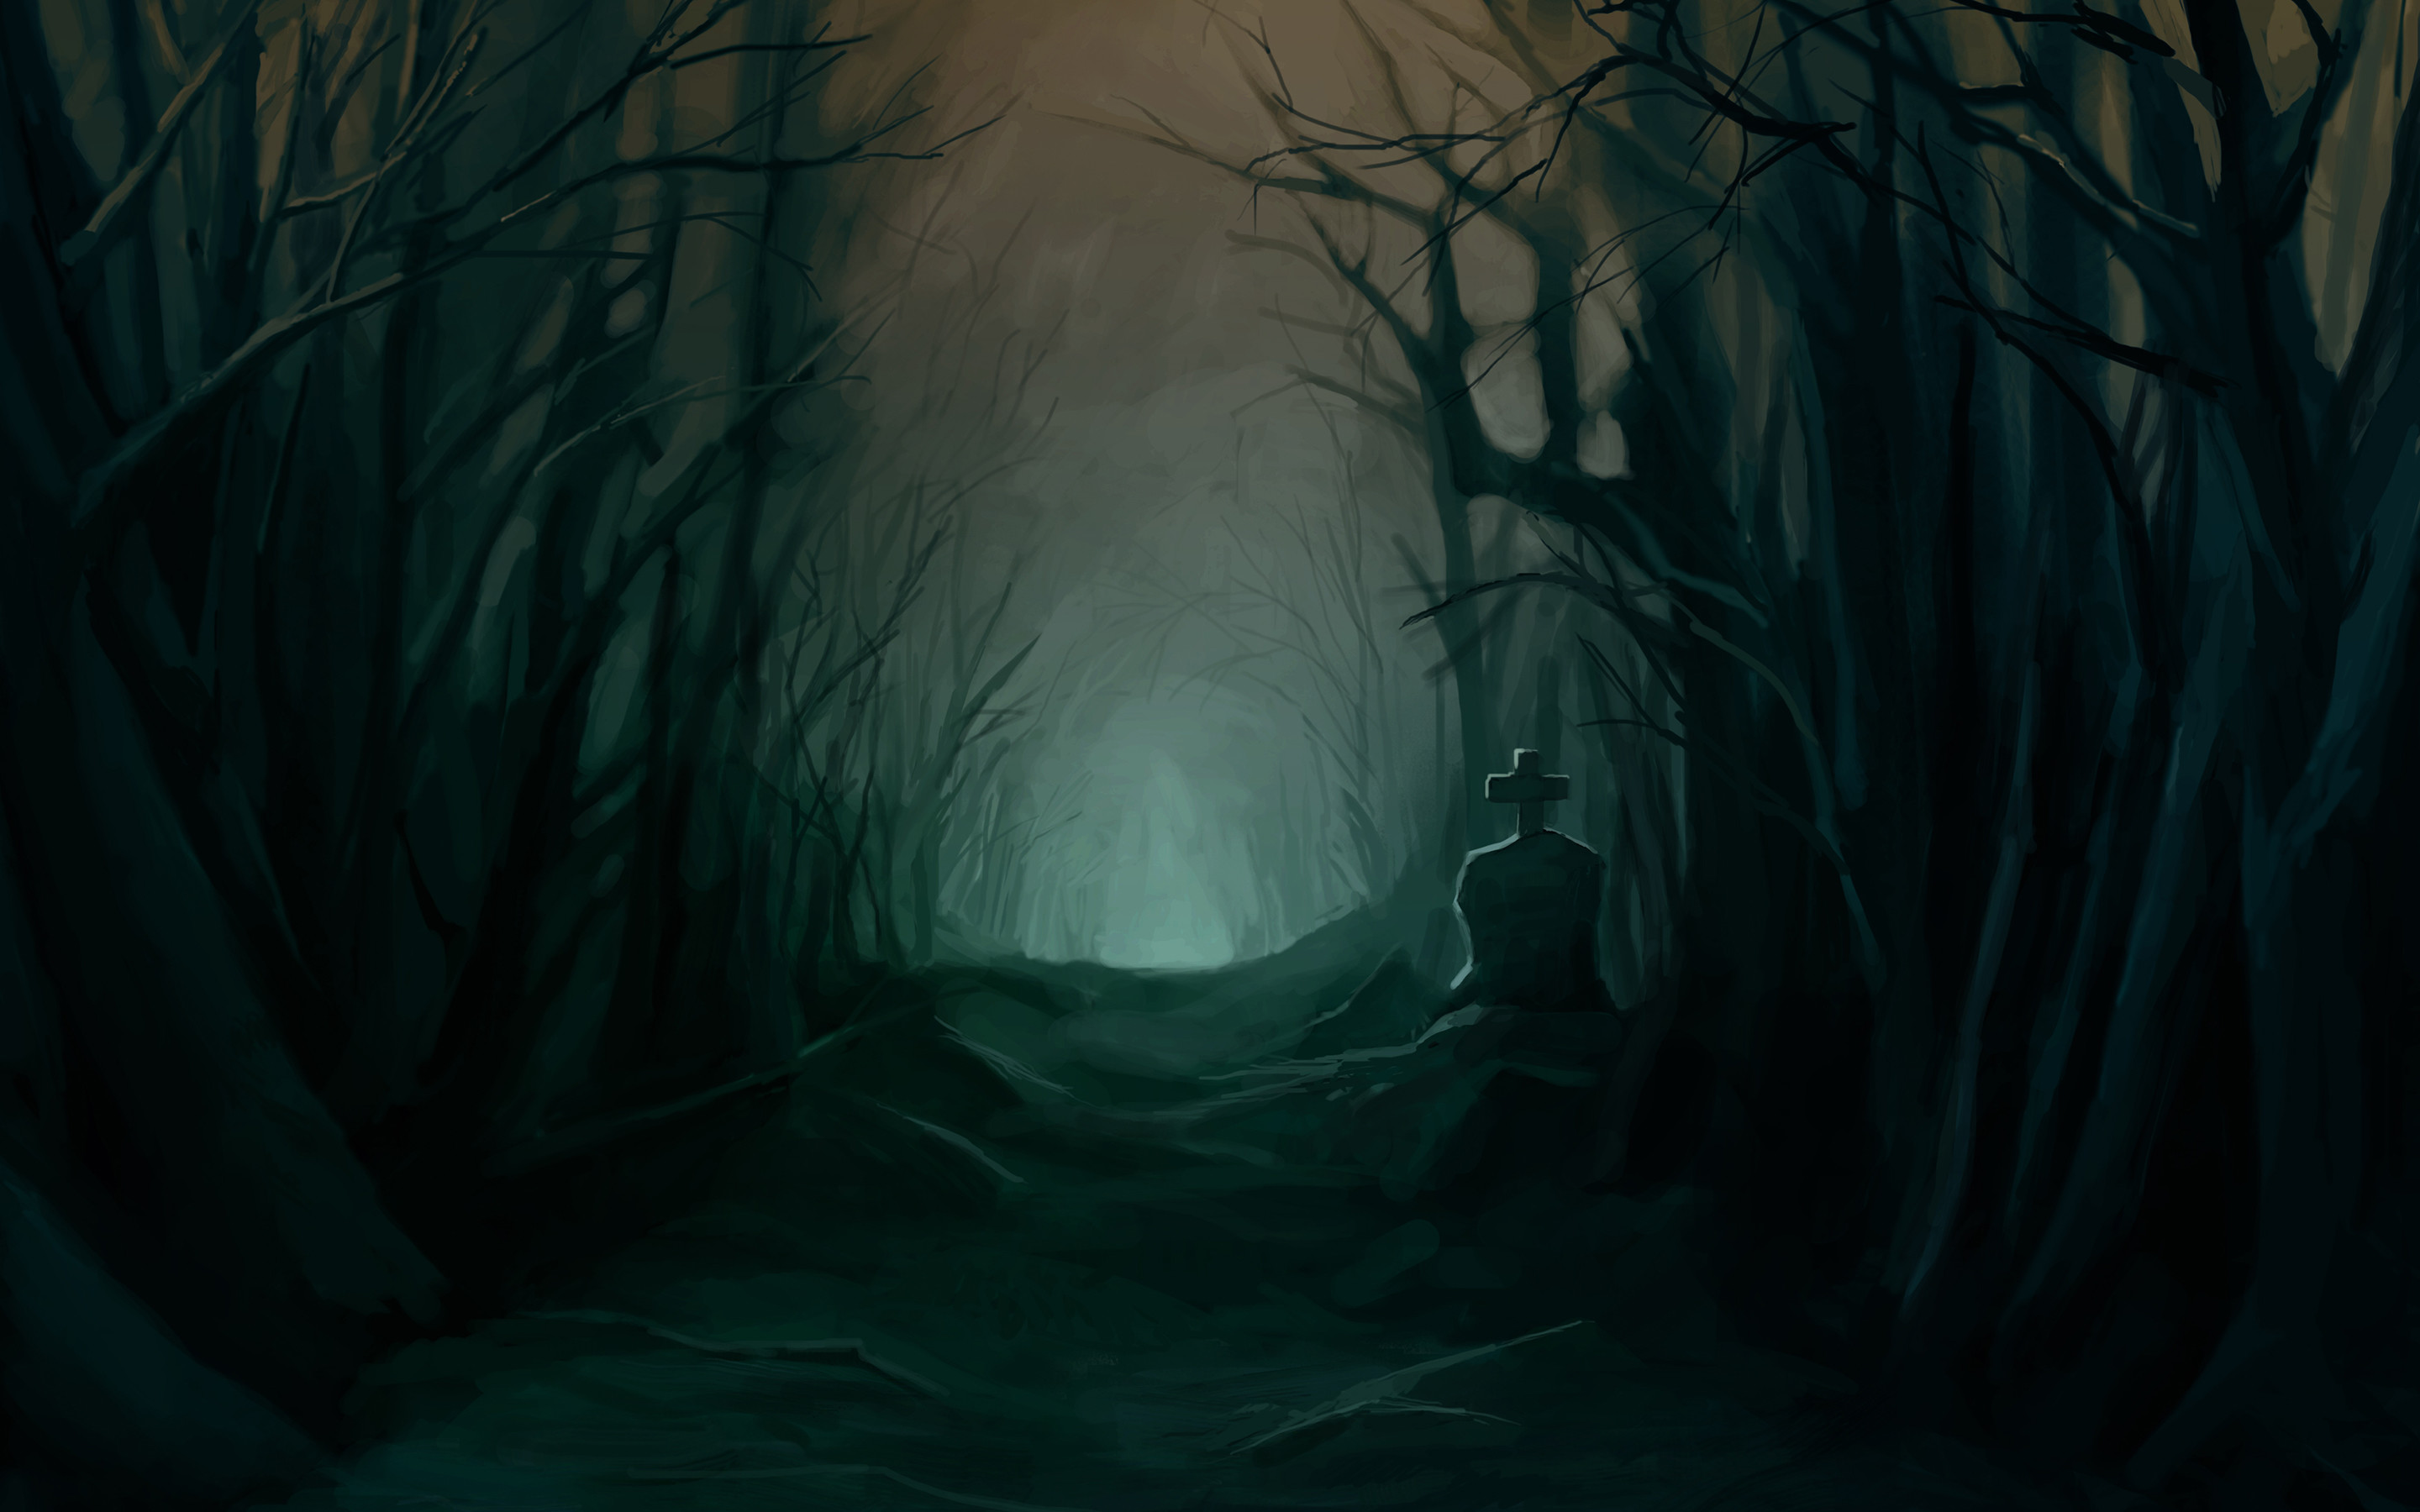 Tombstone Dark Halloween Trees Forest Woods Night Scary Spooky Creepy Glow  Cemetery Grave Landscapes Wallpaper At Dark Wallpapers